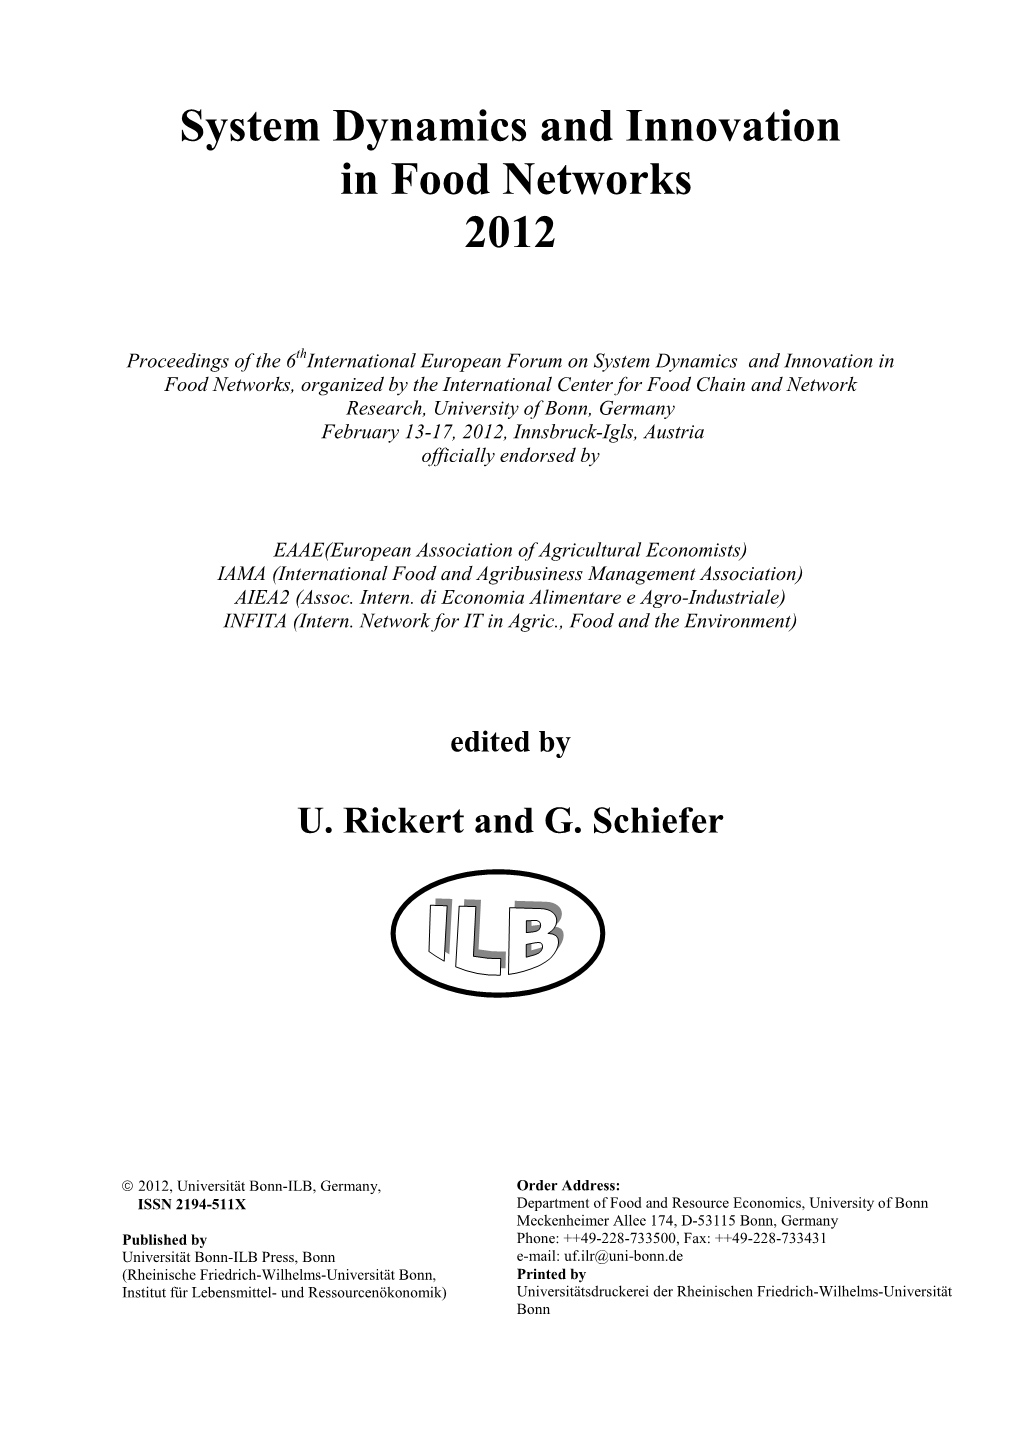 System Dynamics and Innovation in Food Networks 2012